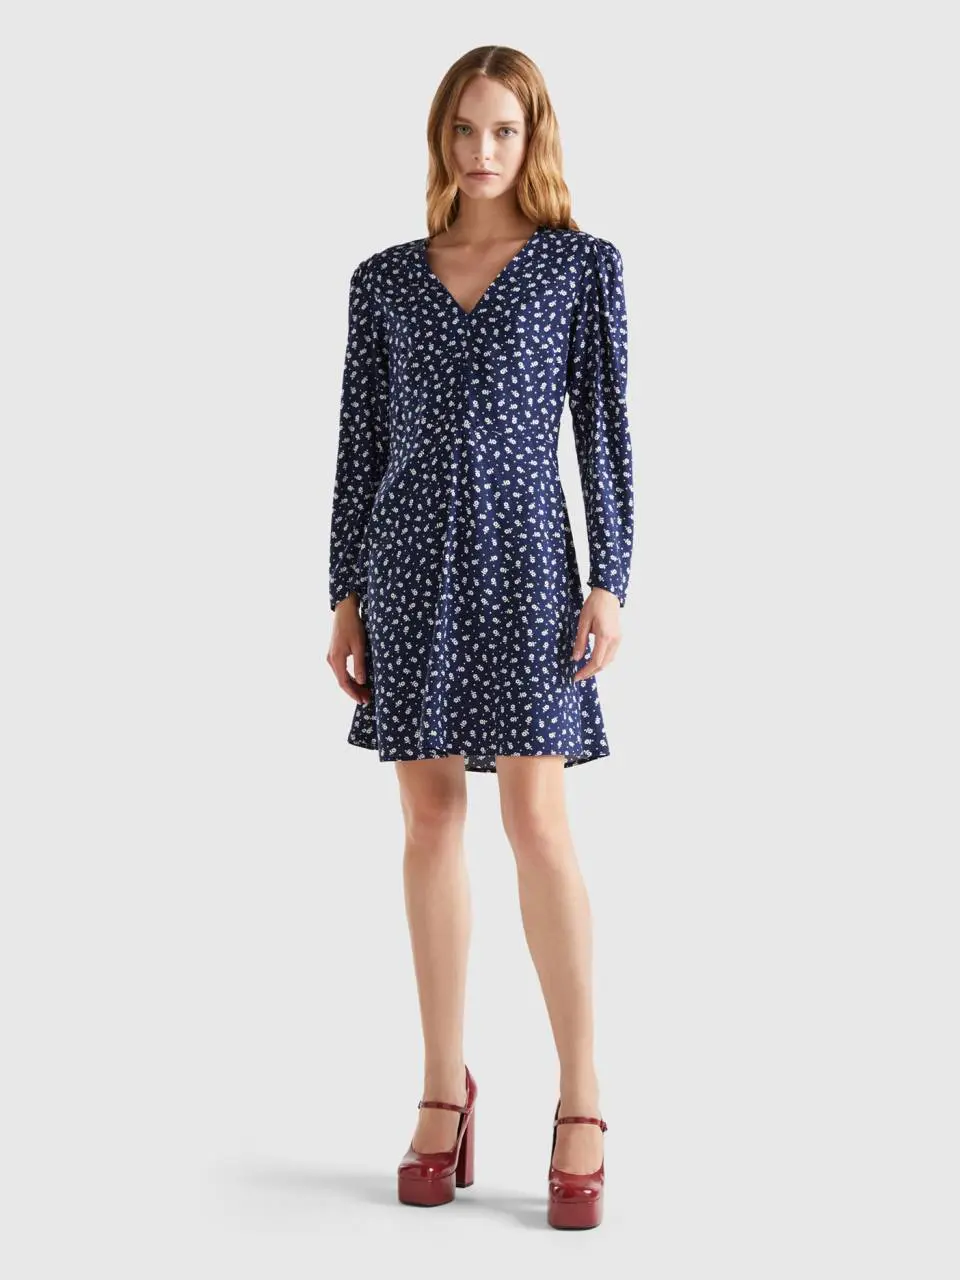 Benetton patterned dress in sustainable viscose. 1